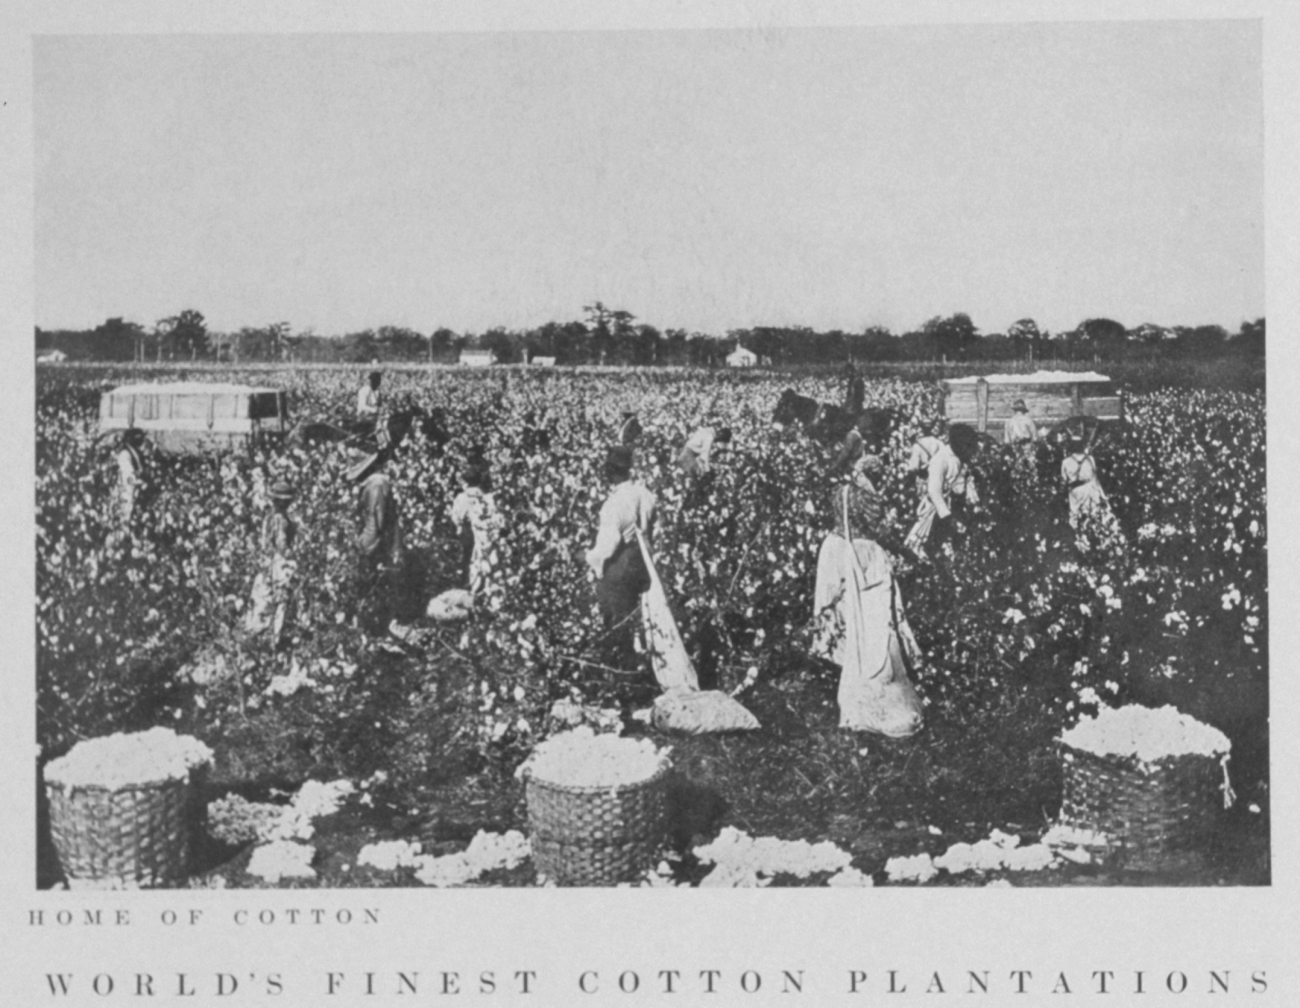 Home of cotton